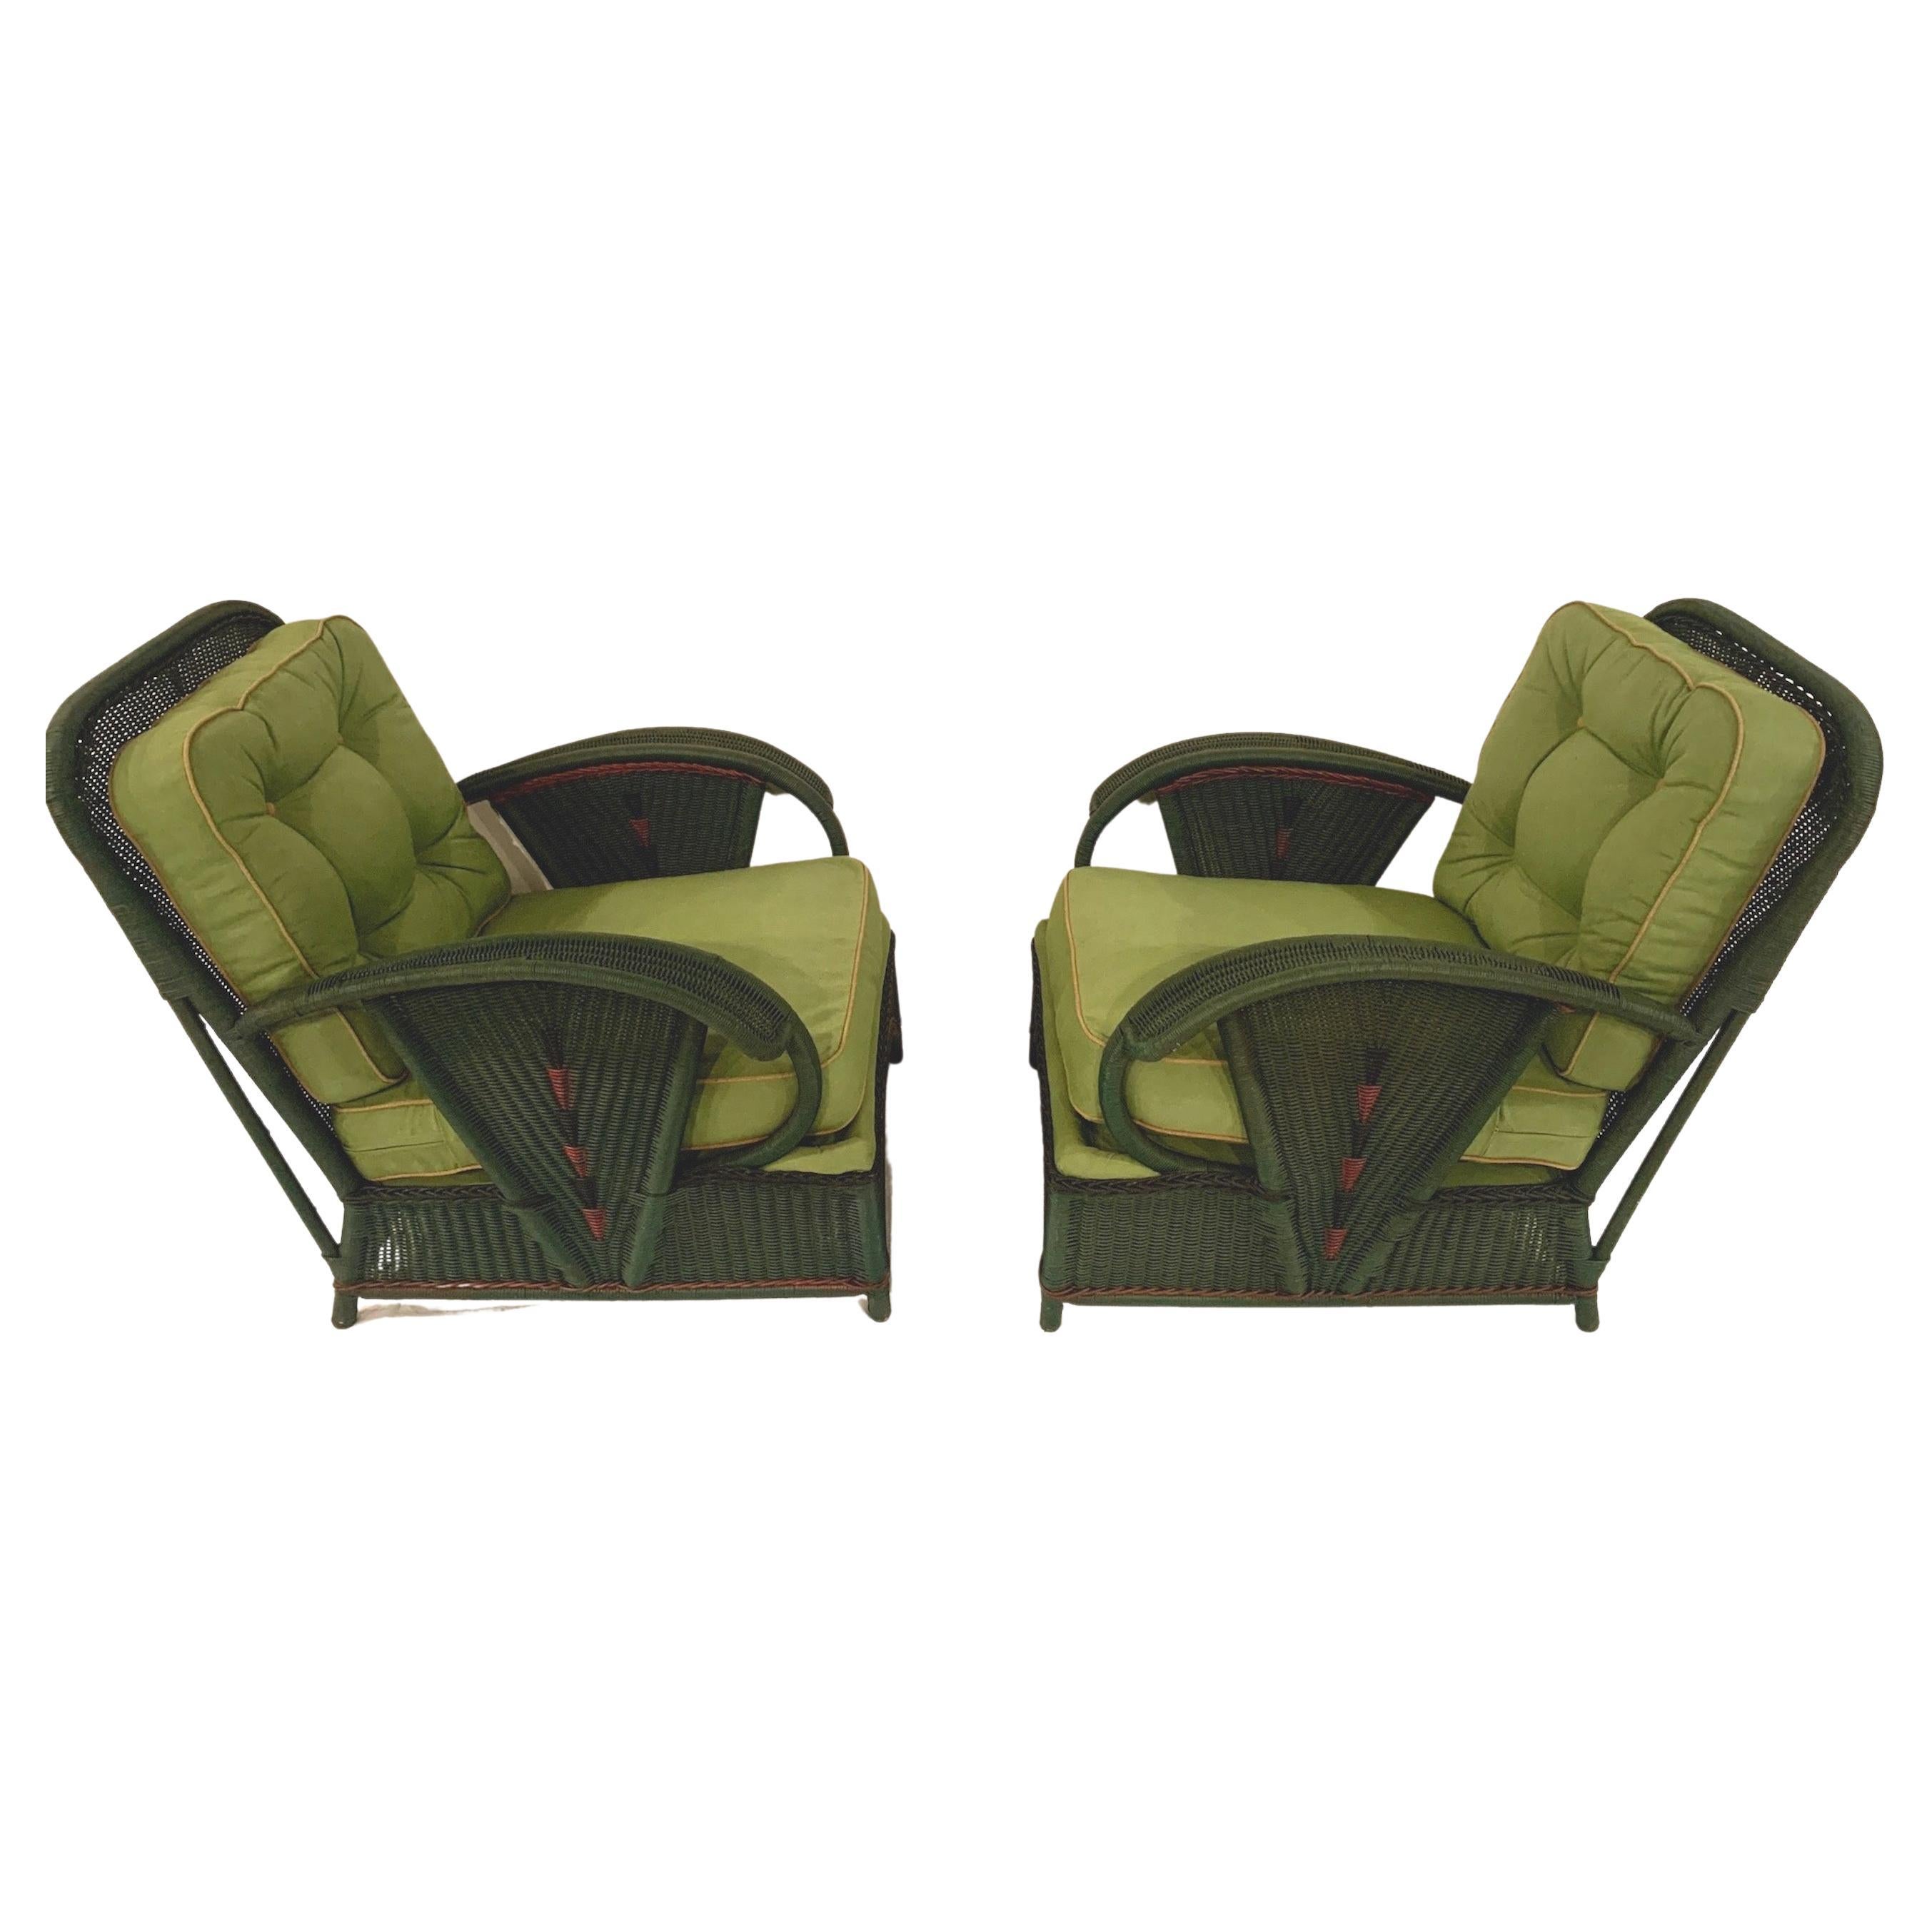 Pair of Green Antique Wicker Art Deco Lounge Chairs with Decorative Trim For Sale